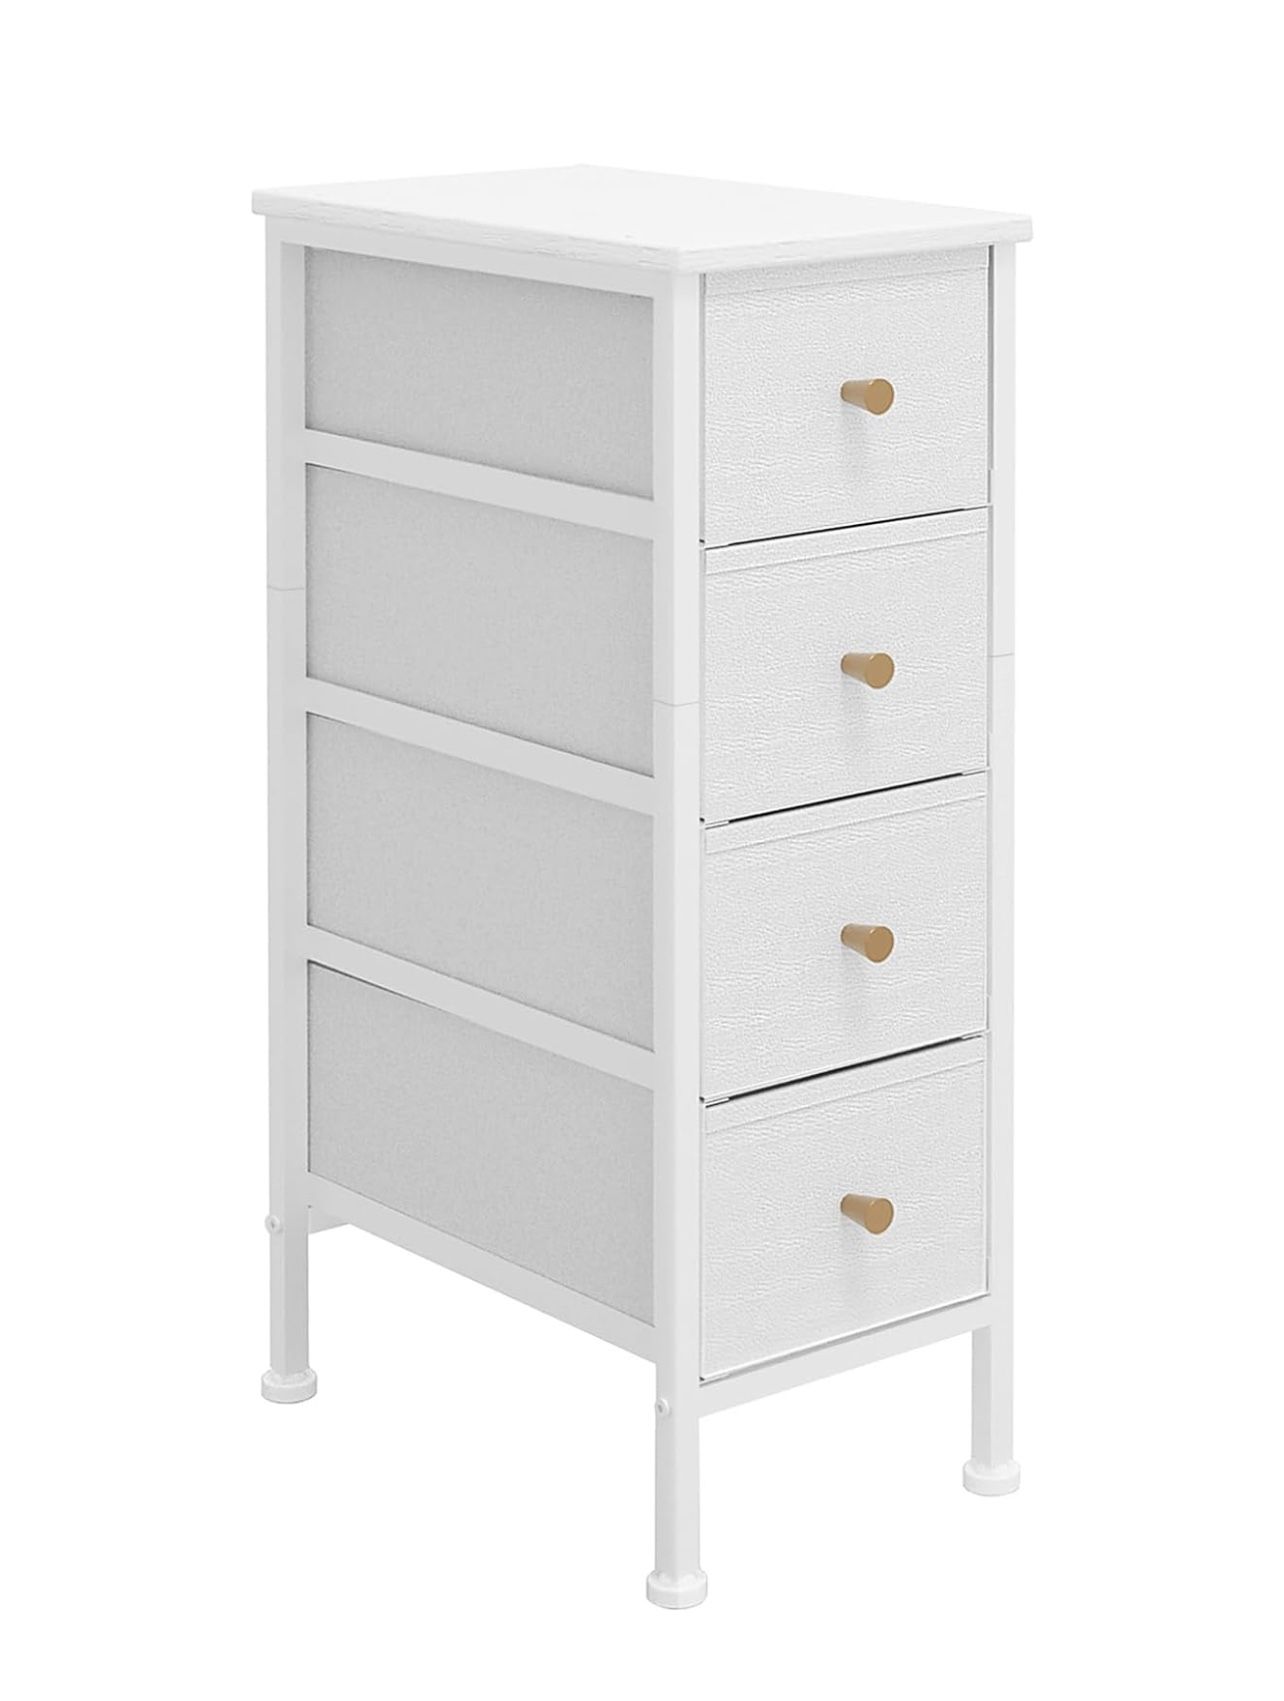 AHRODY Narrow Dresser with 4 Drawers, Slim Drawer Storage Tower for Small Spaces